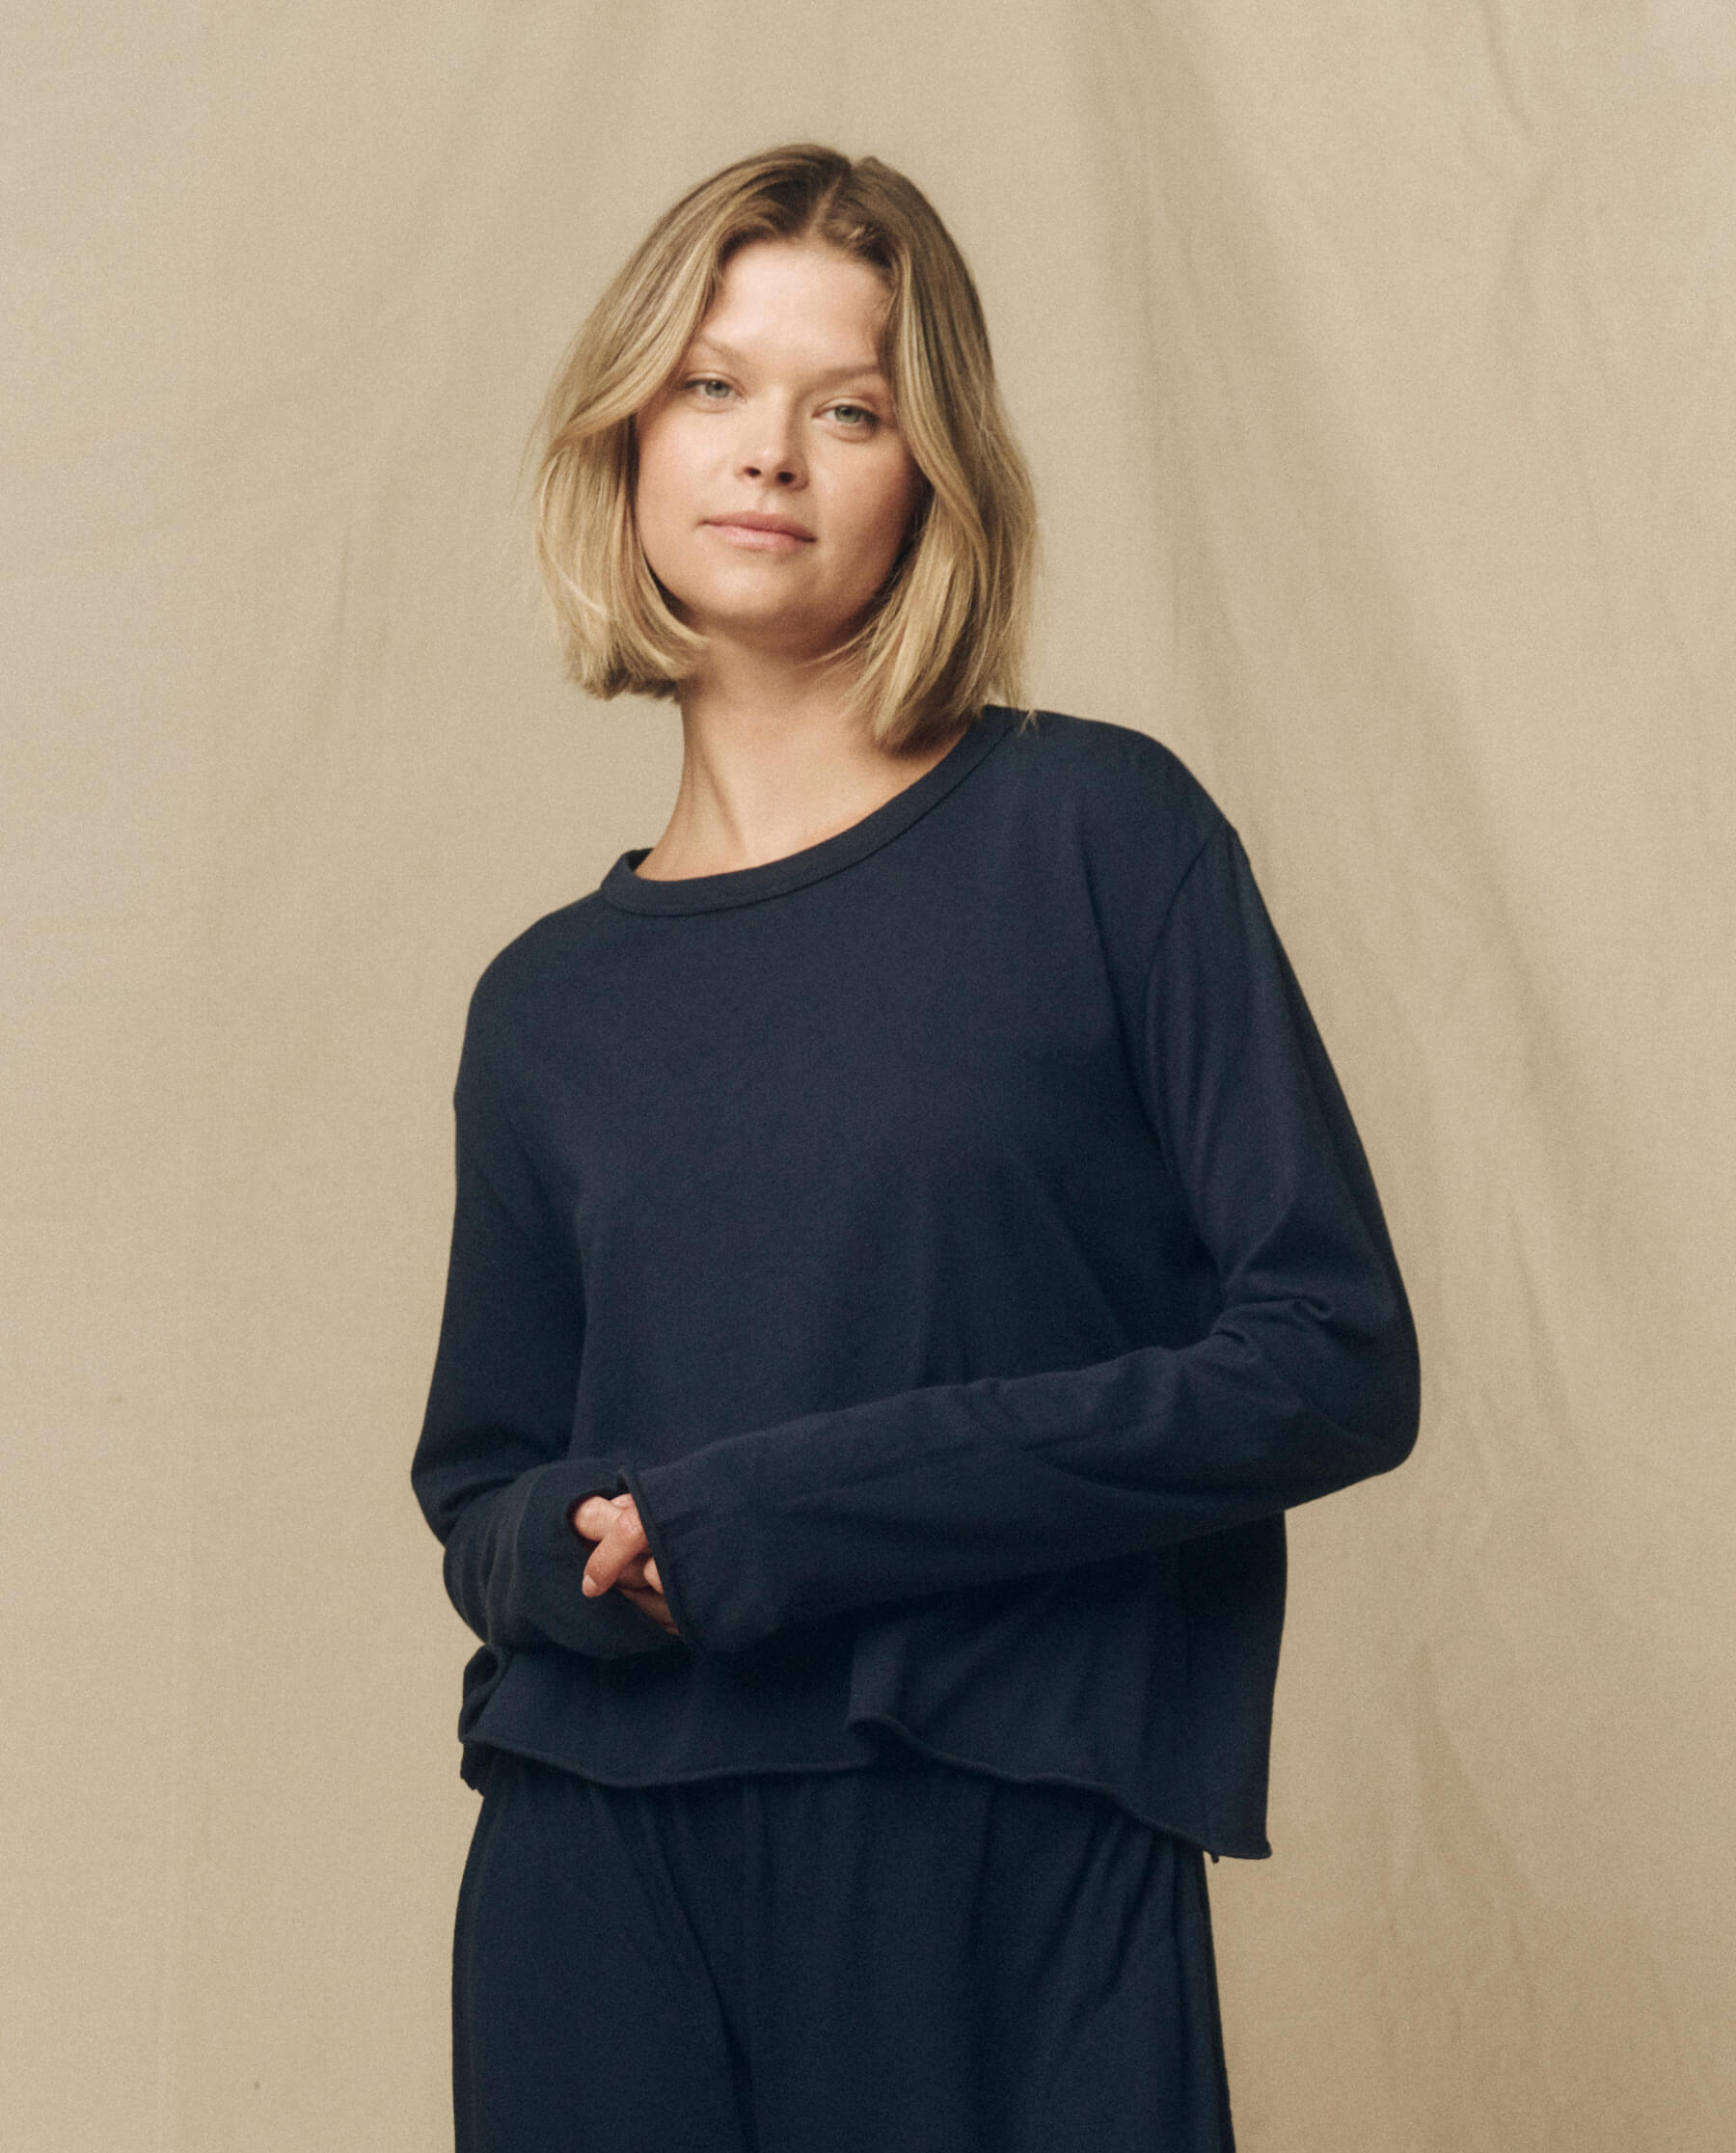 The Long Sleeve Crop Tee. -- True Navy TEES THE GREAT. FALL 23 KNITS